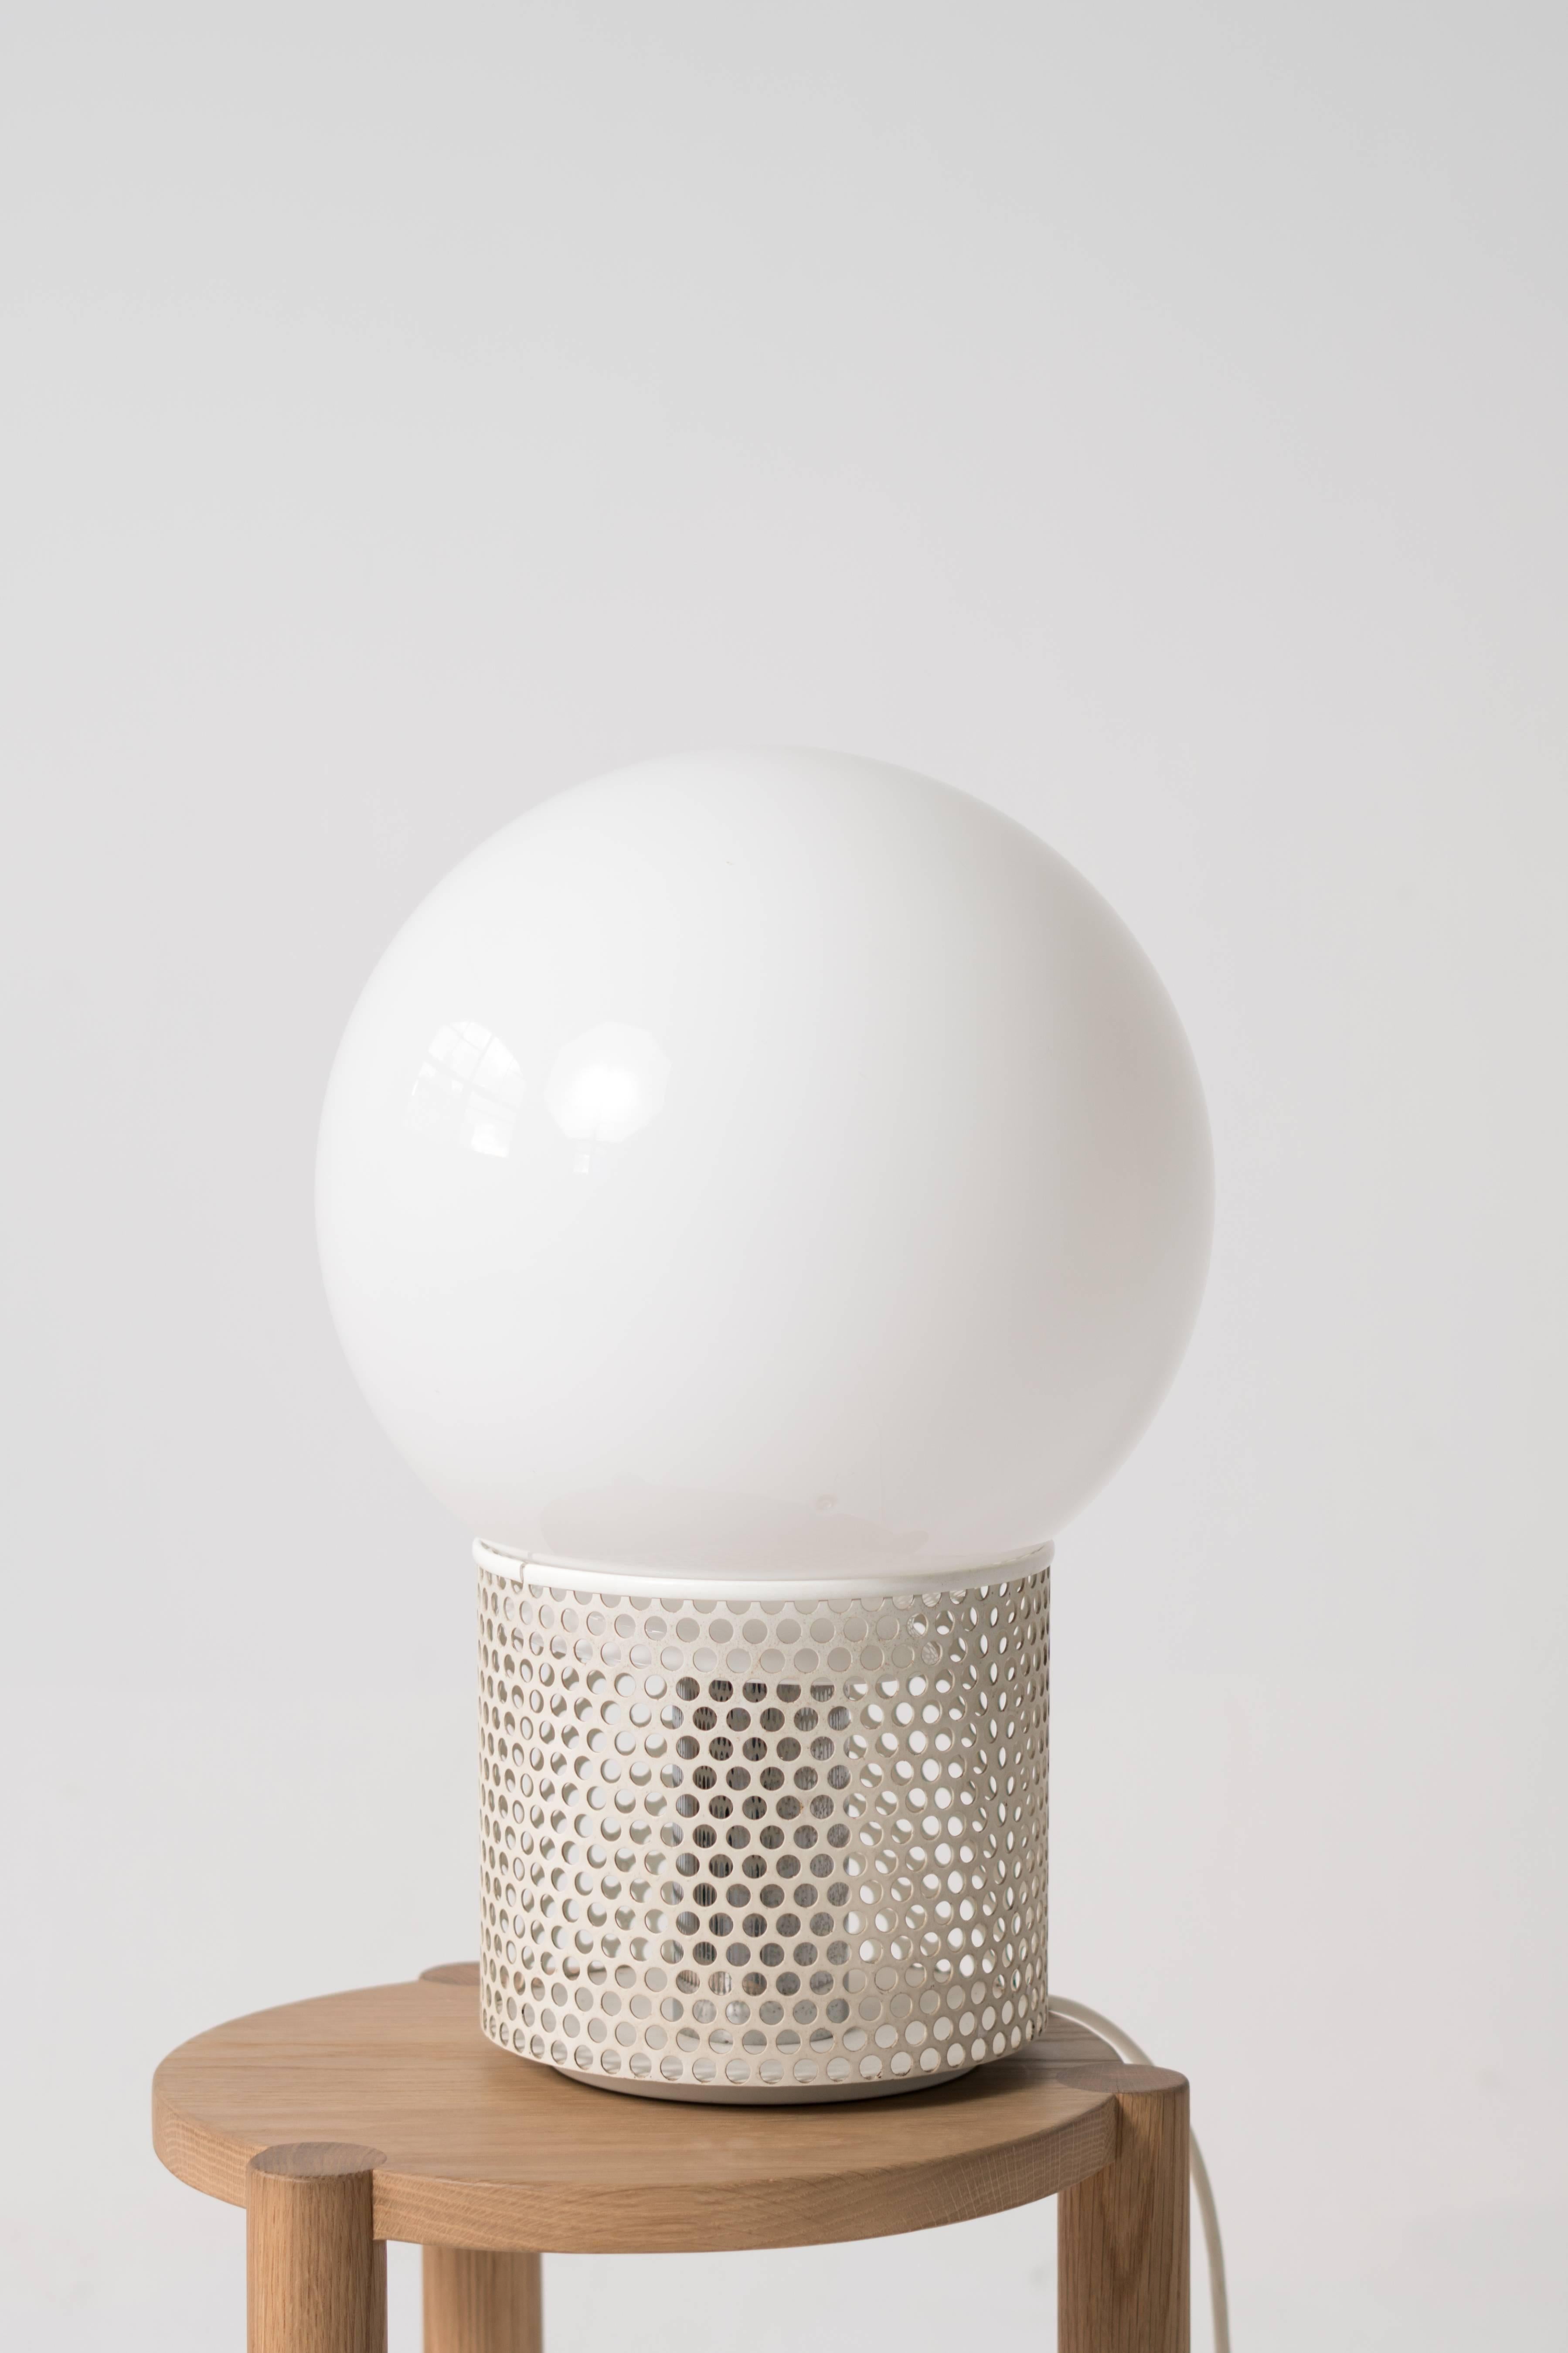 A very large orb lamp by Michel Boyer with a white lacquered perforated metal base. 

The light has been rewired with a US plug and is fully functional with a new LED light bulb.